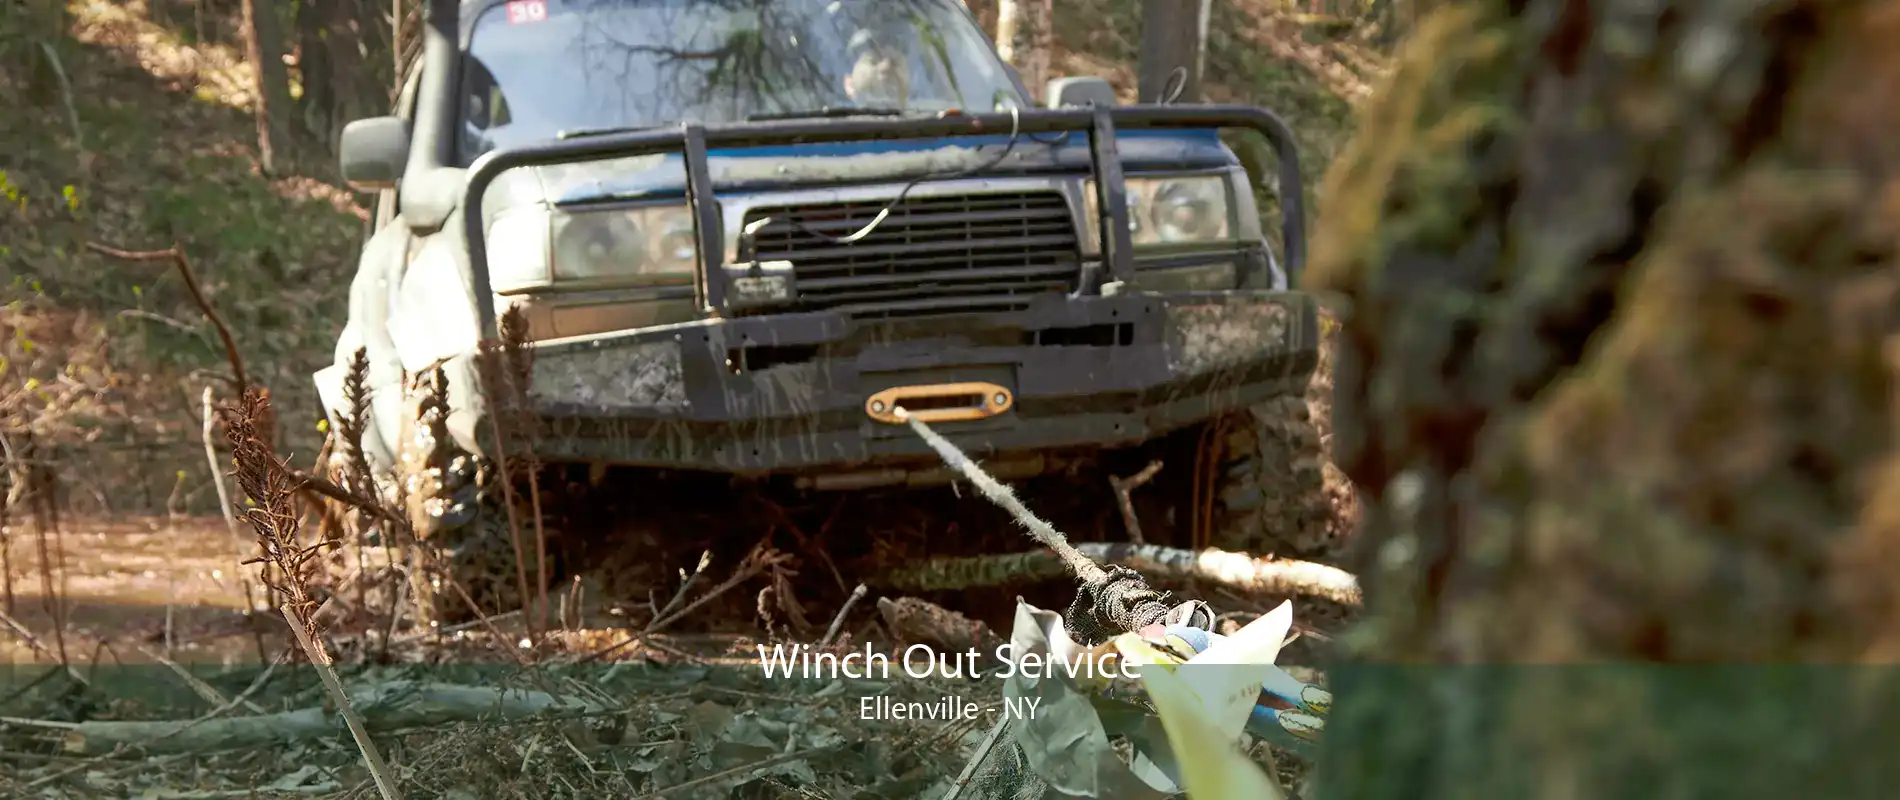 Winch Out Service Ellenville - NY